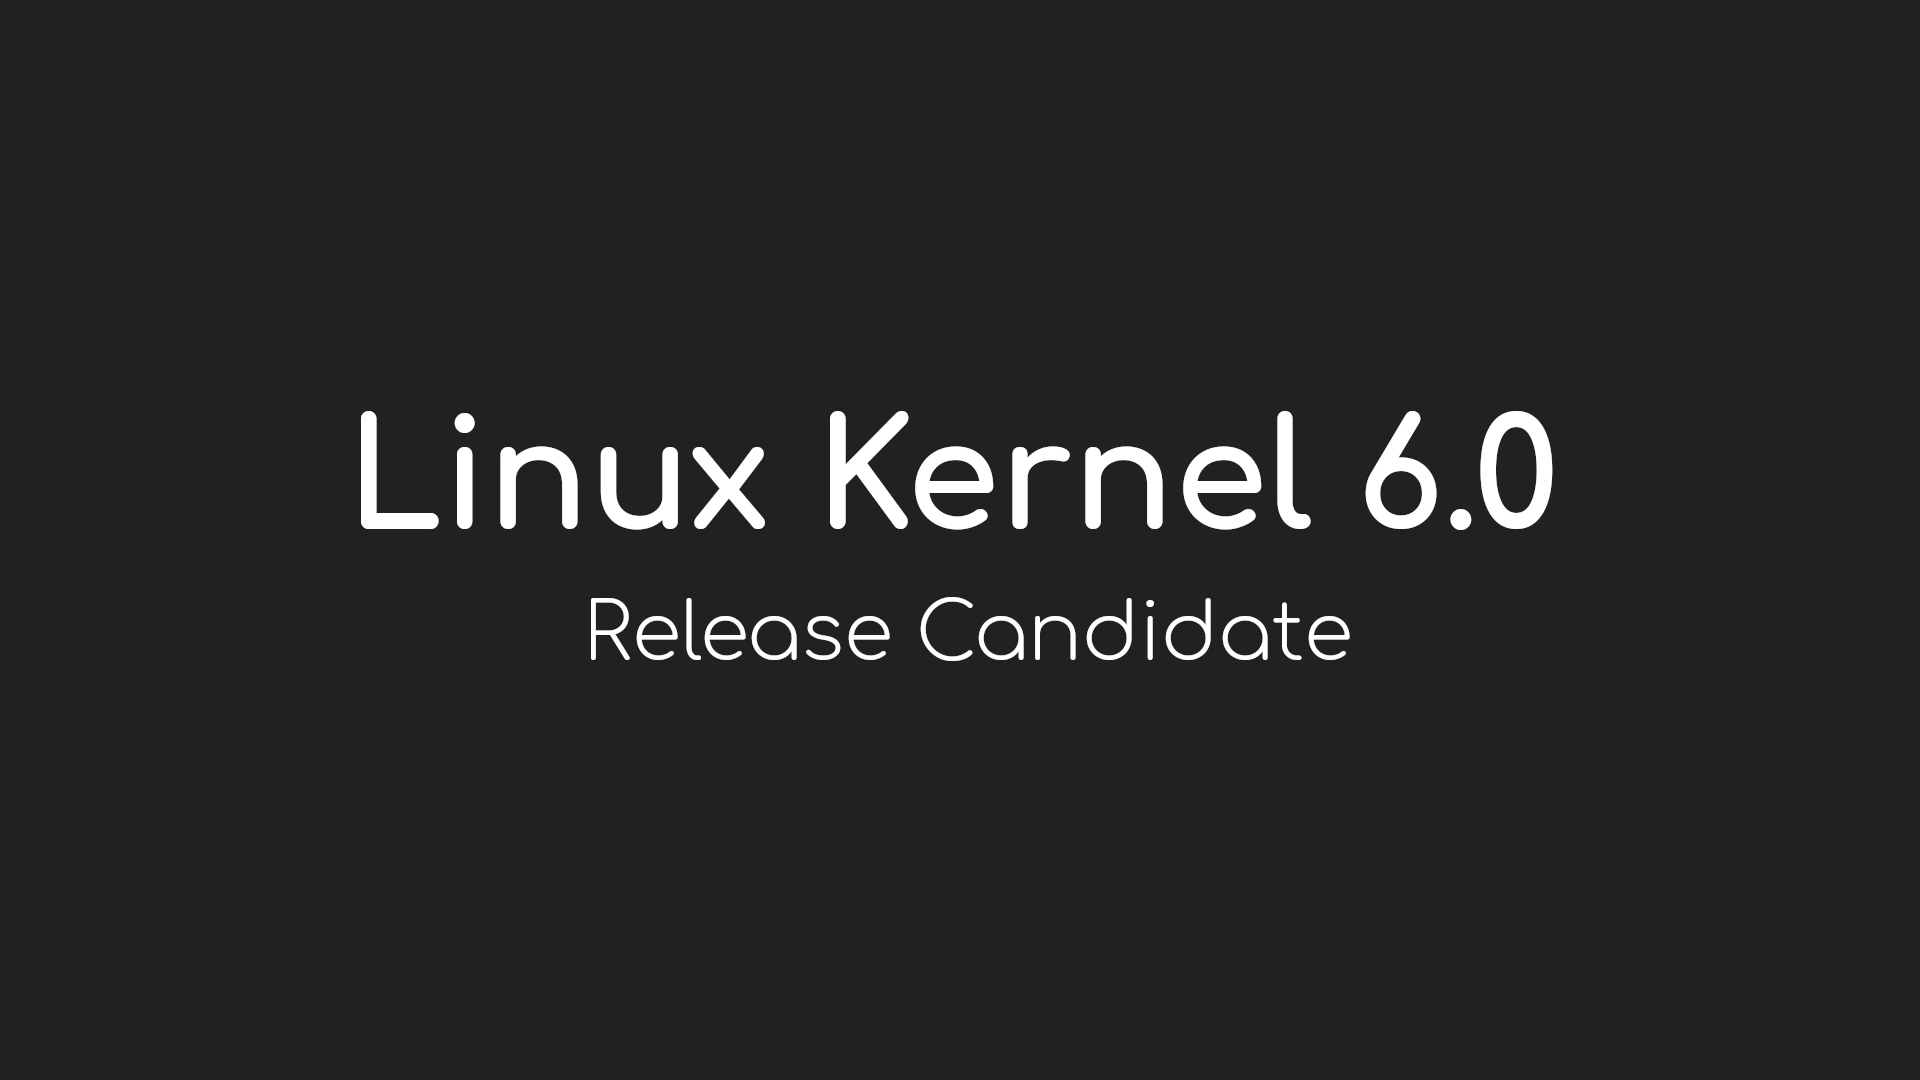 Linus Torvalds Announces First Linux Kernel 6.0 Release Candidate